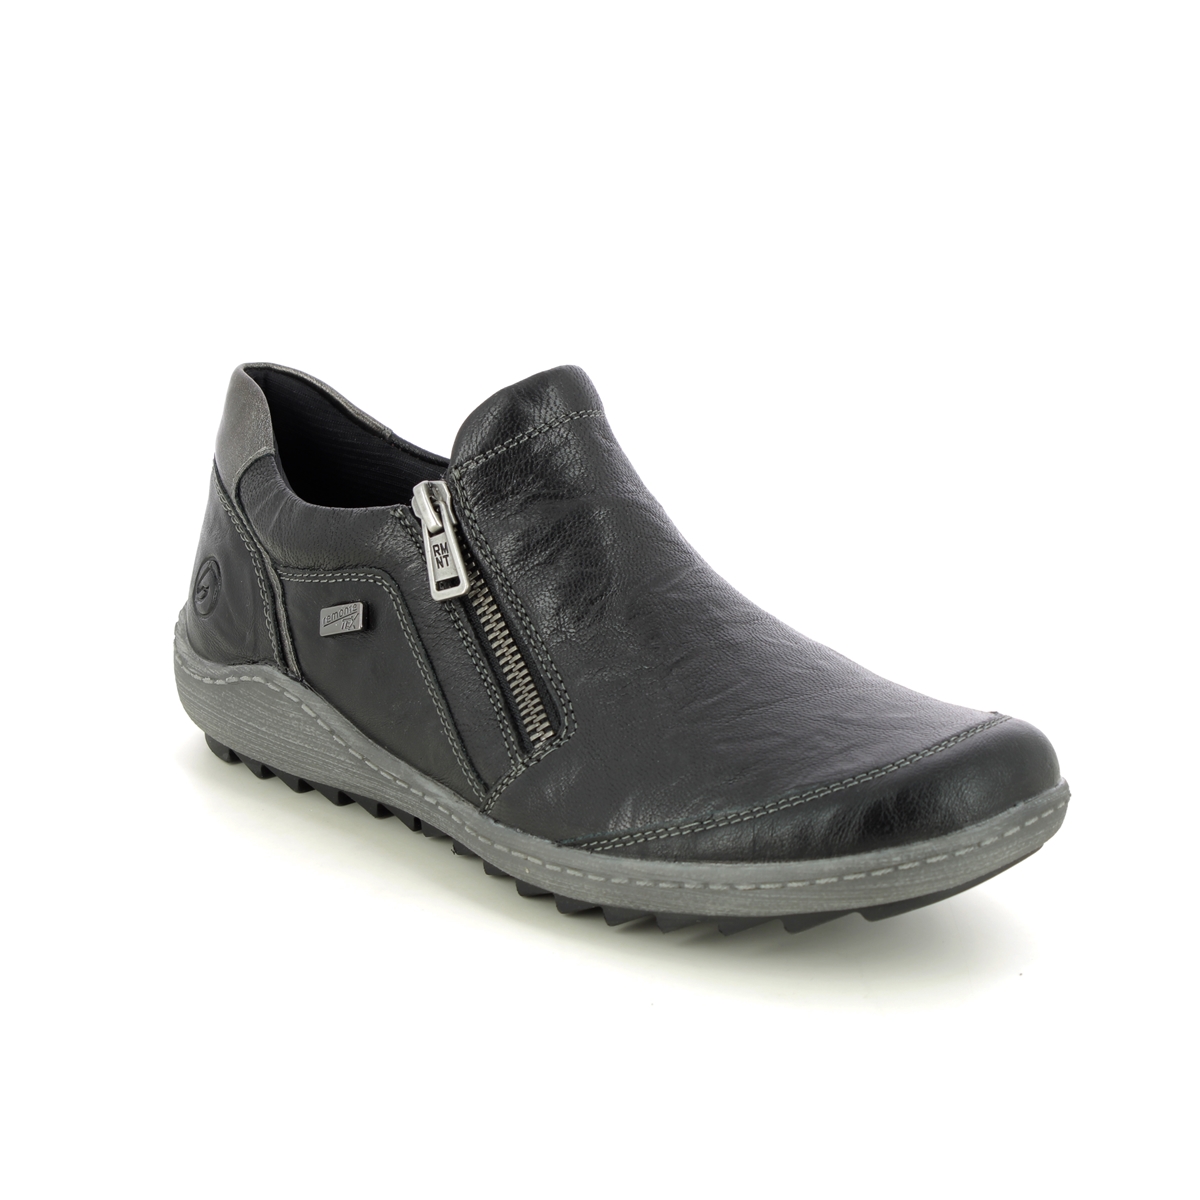 Remonte Zigshu Slip Tex Black Leather Womens Comfort Slip On Shoes R1428-03 In Size 42 In Plain Black Leather